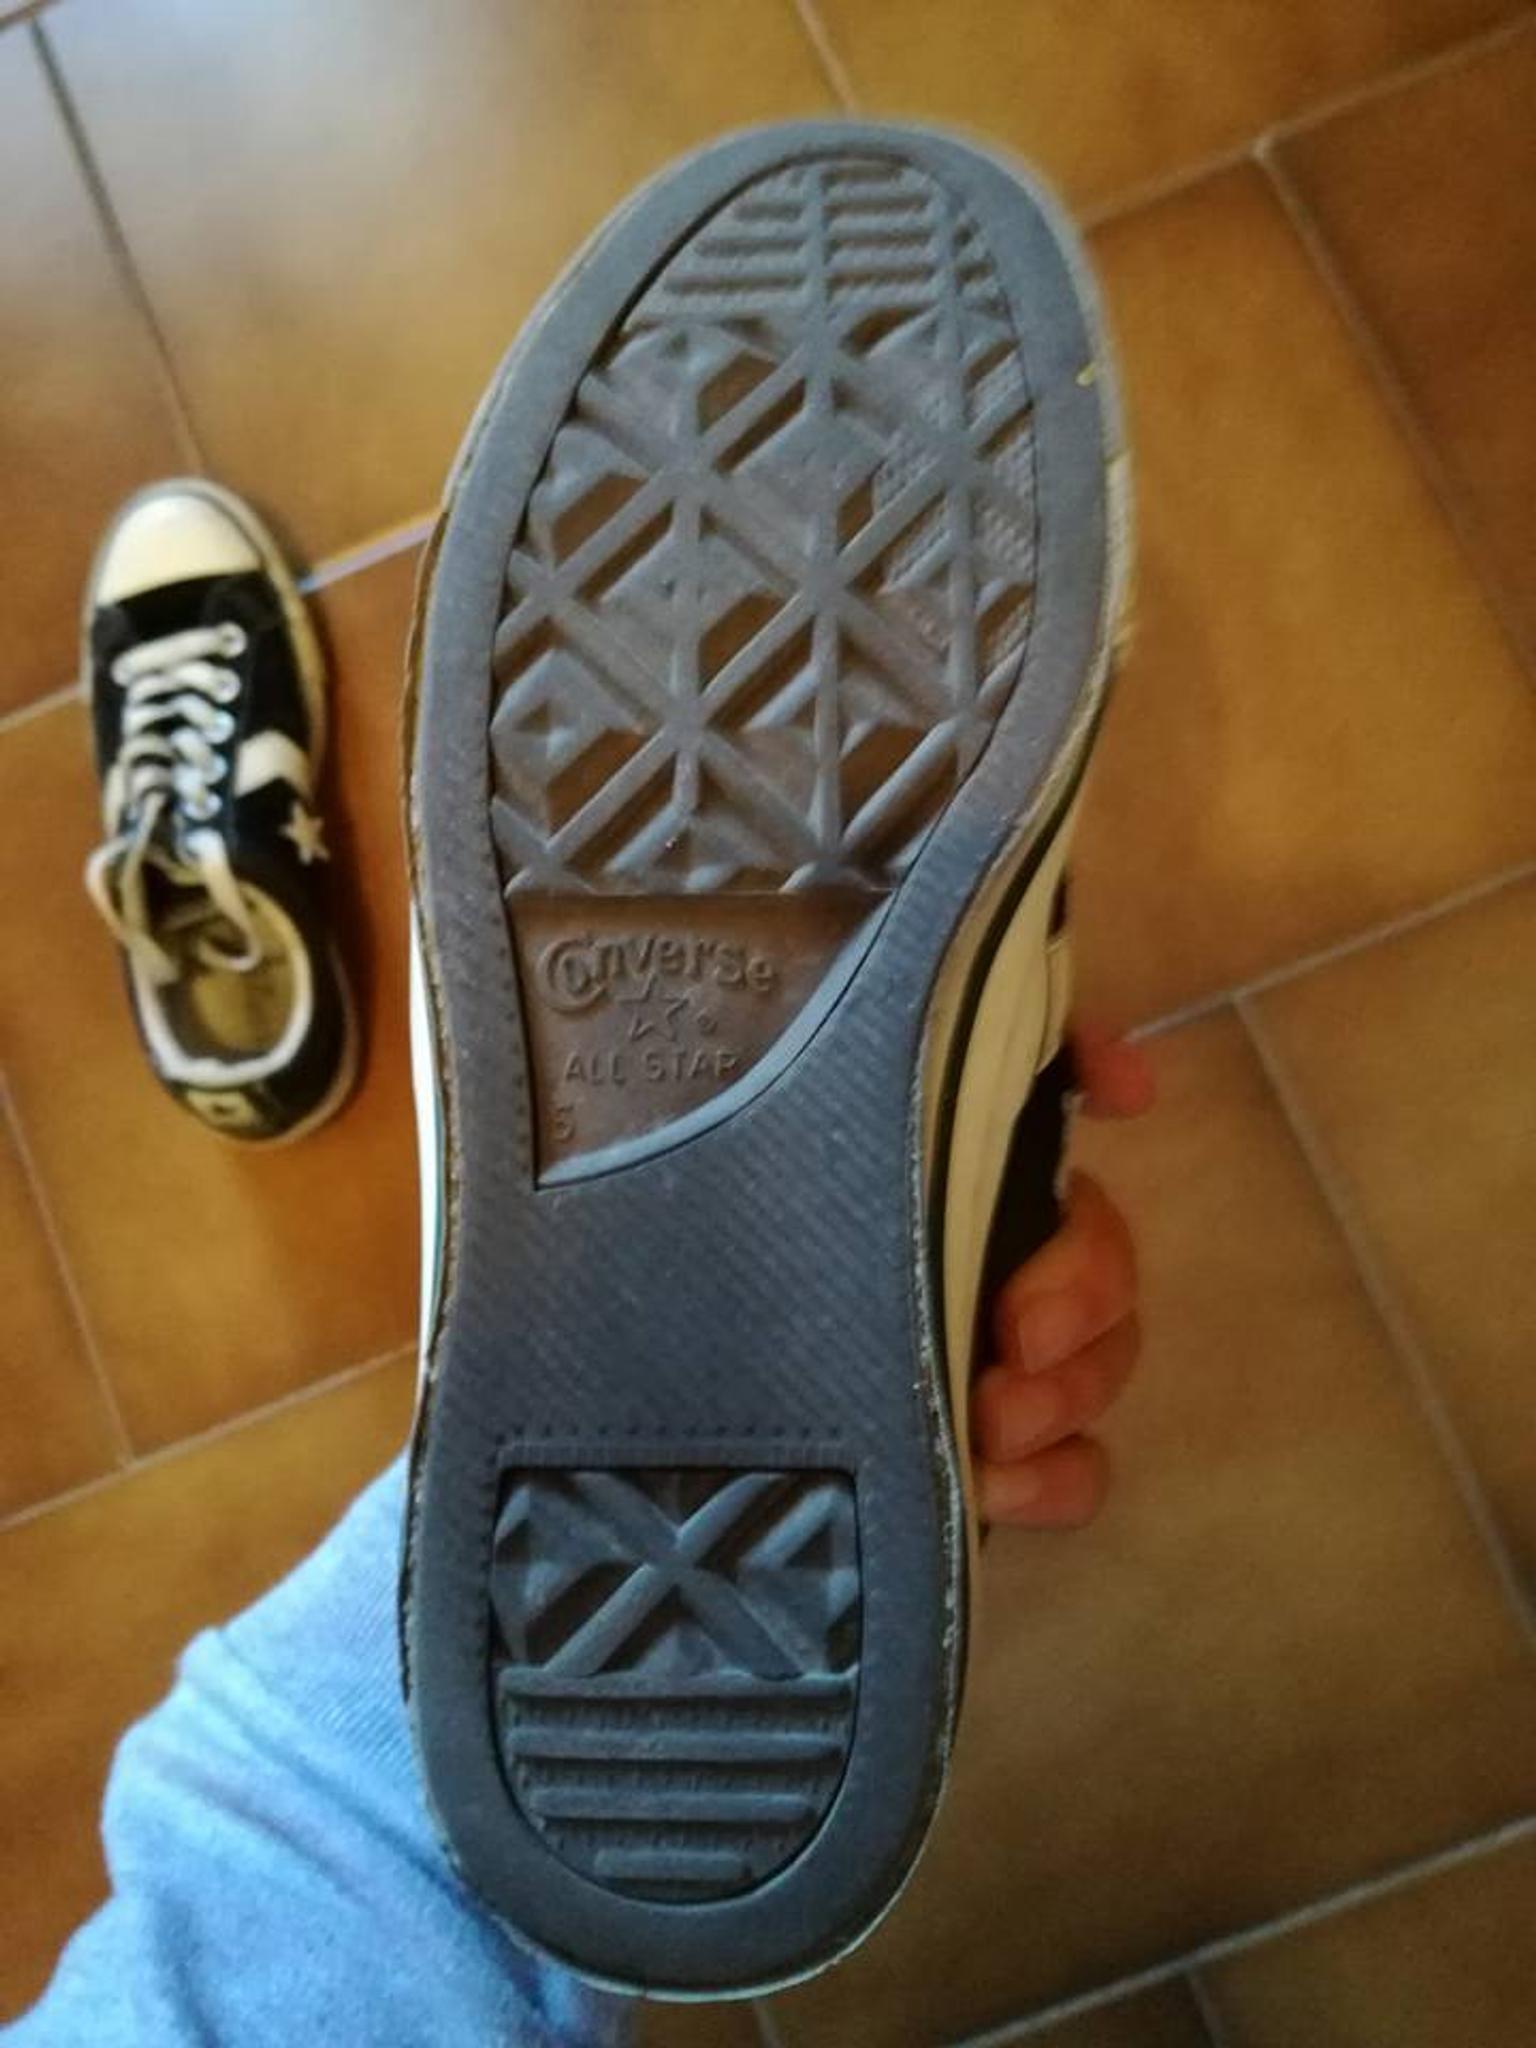 Converse All Star in 09032 Assemini for €4.00 for sale | Shpock